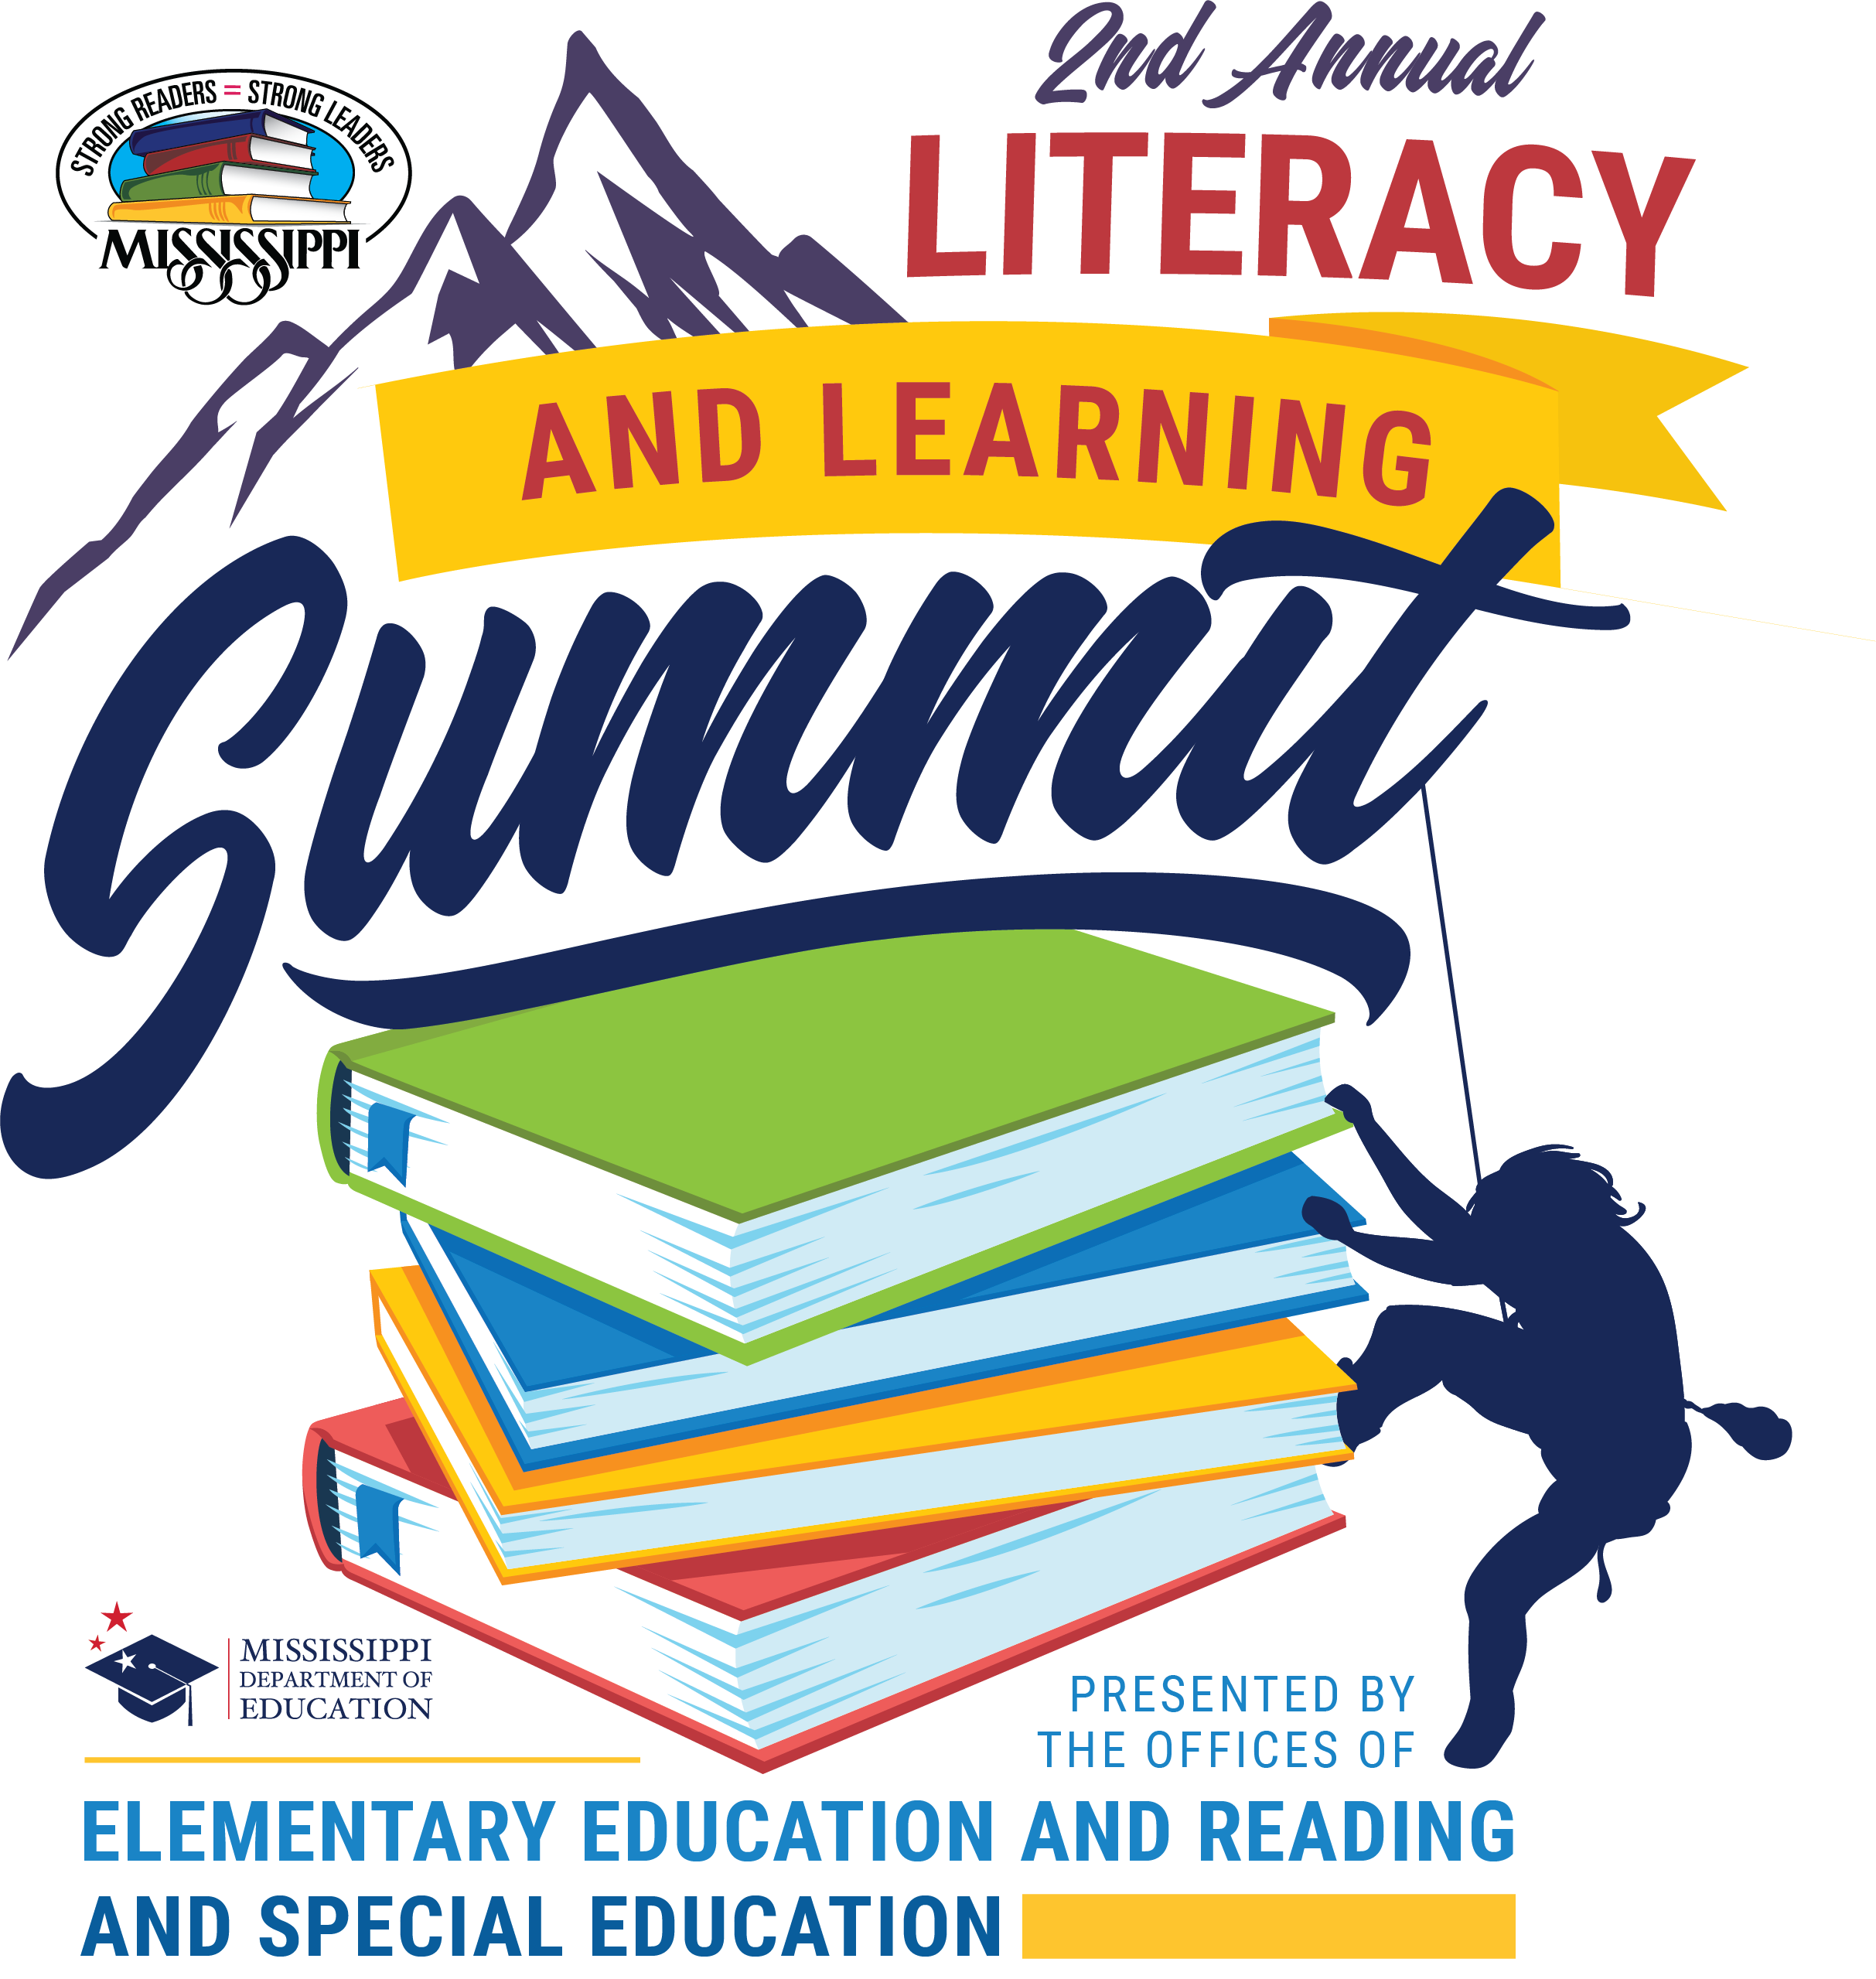 Second Annual Literacy and Learning Summit sponsored by the Offices of Elementary Education and Reading and Special Education